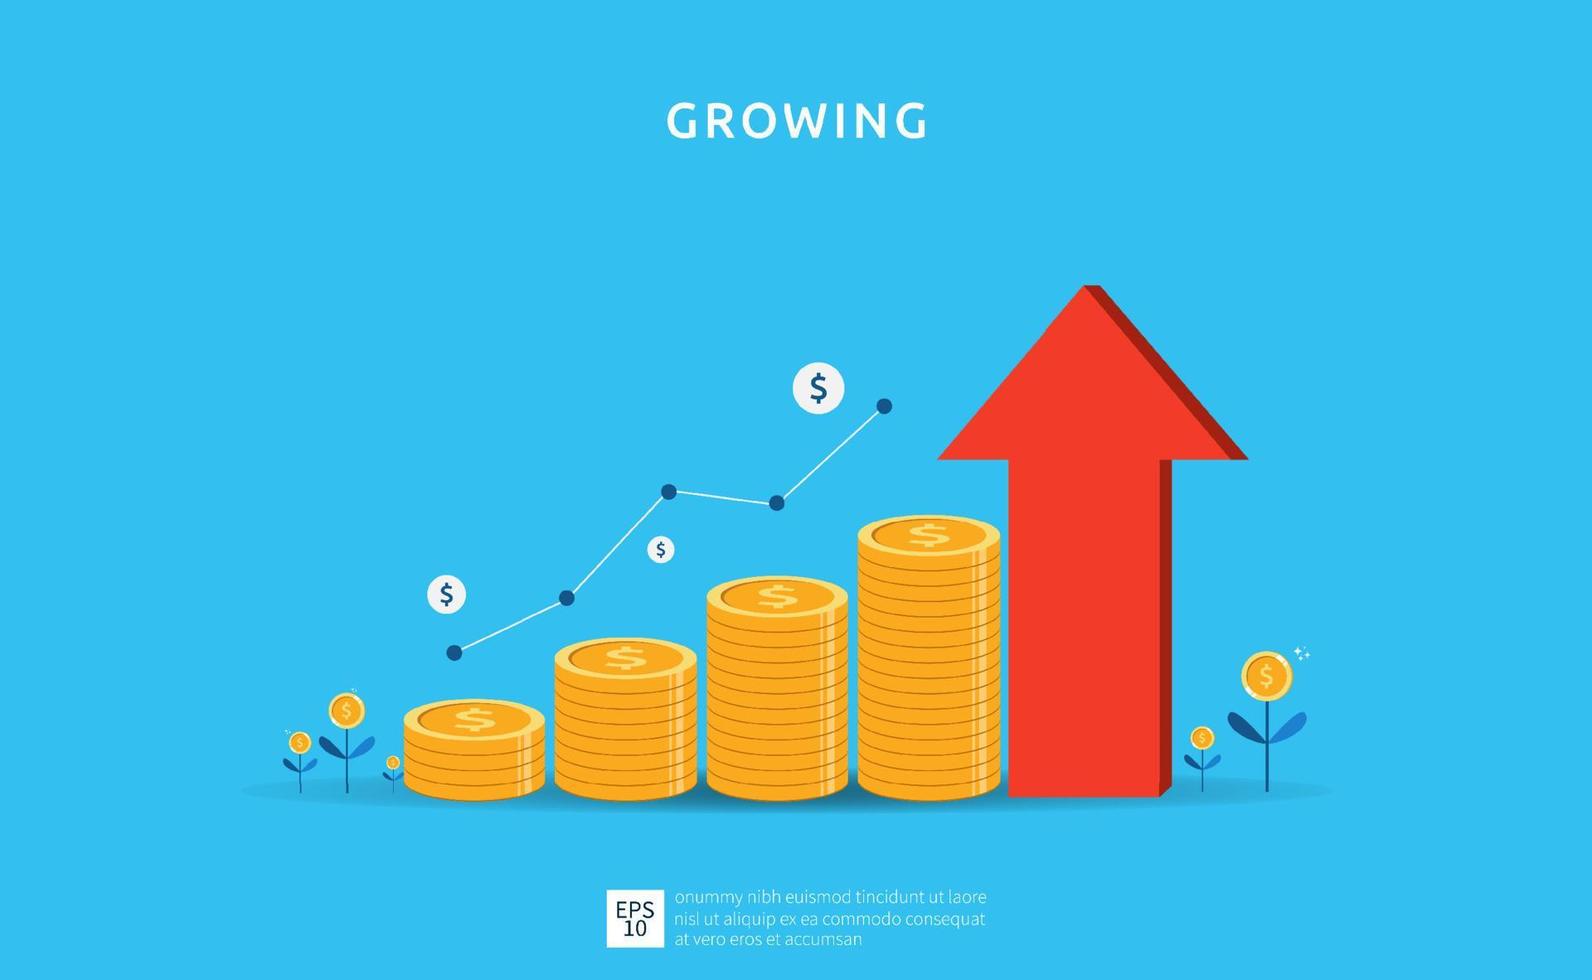 PrintBusiness growth illustration for smart investment concept. Profit performance or income with pile coins symbol and arrow. Return on investment ROI vector